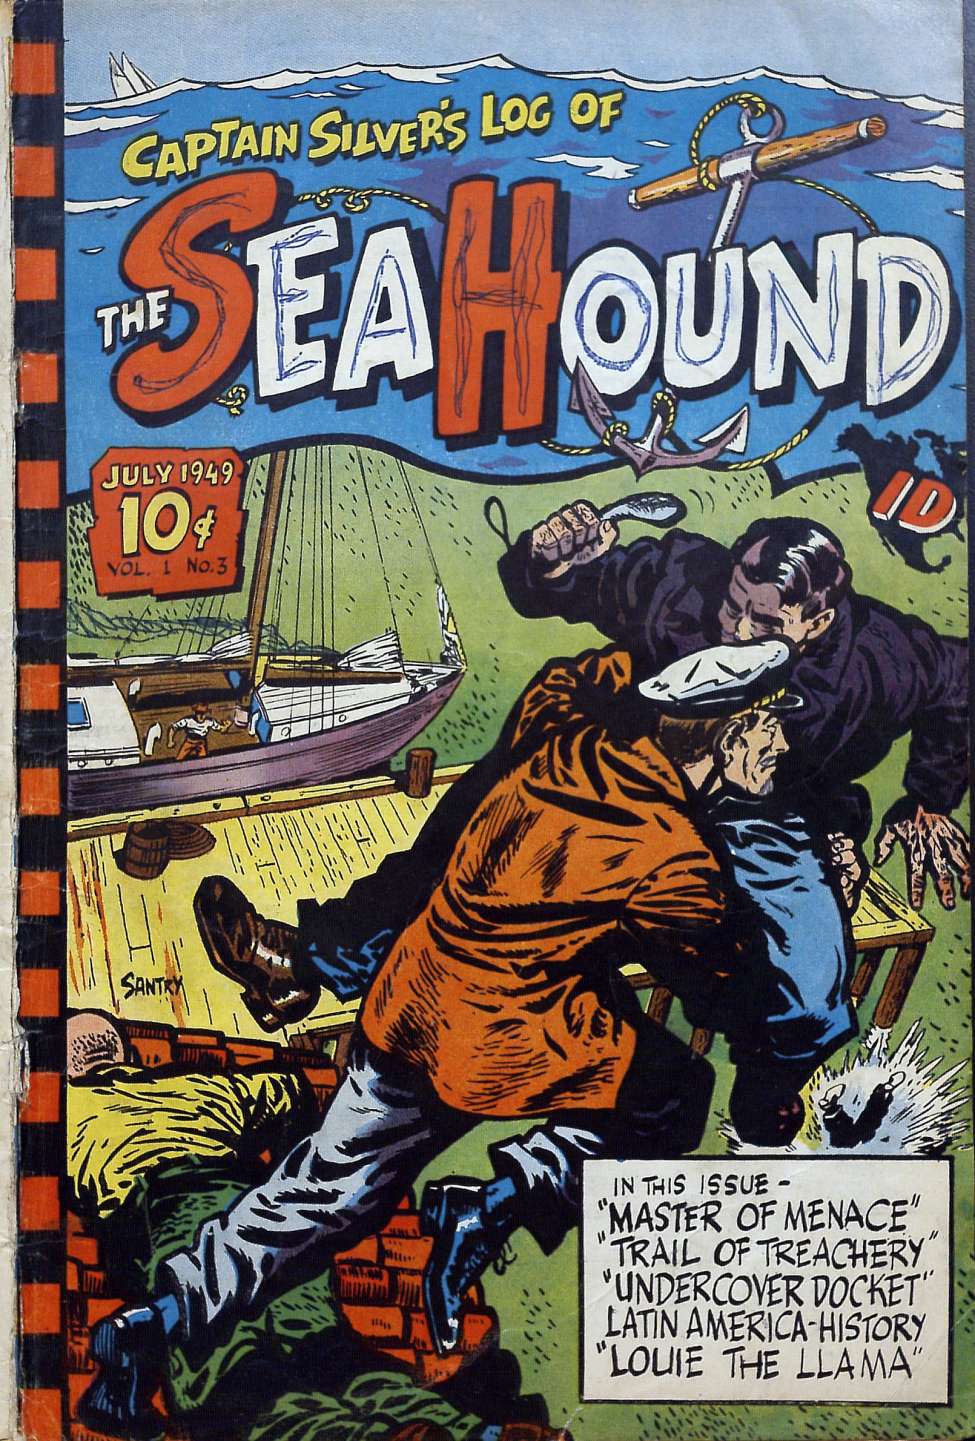 Comic Book Cover For Captain Silver's Log of the Sea Hound 3 (alt) - Version 2